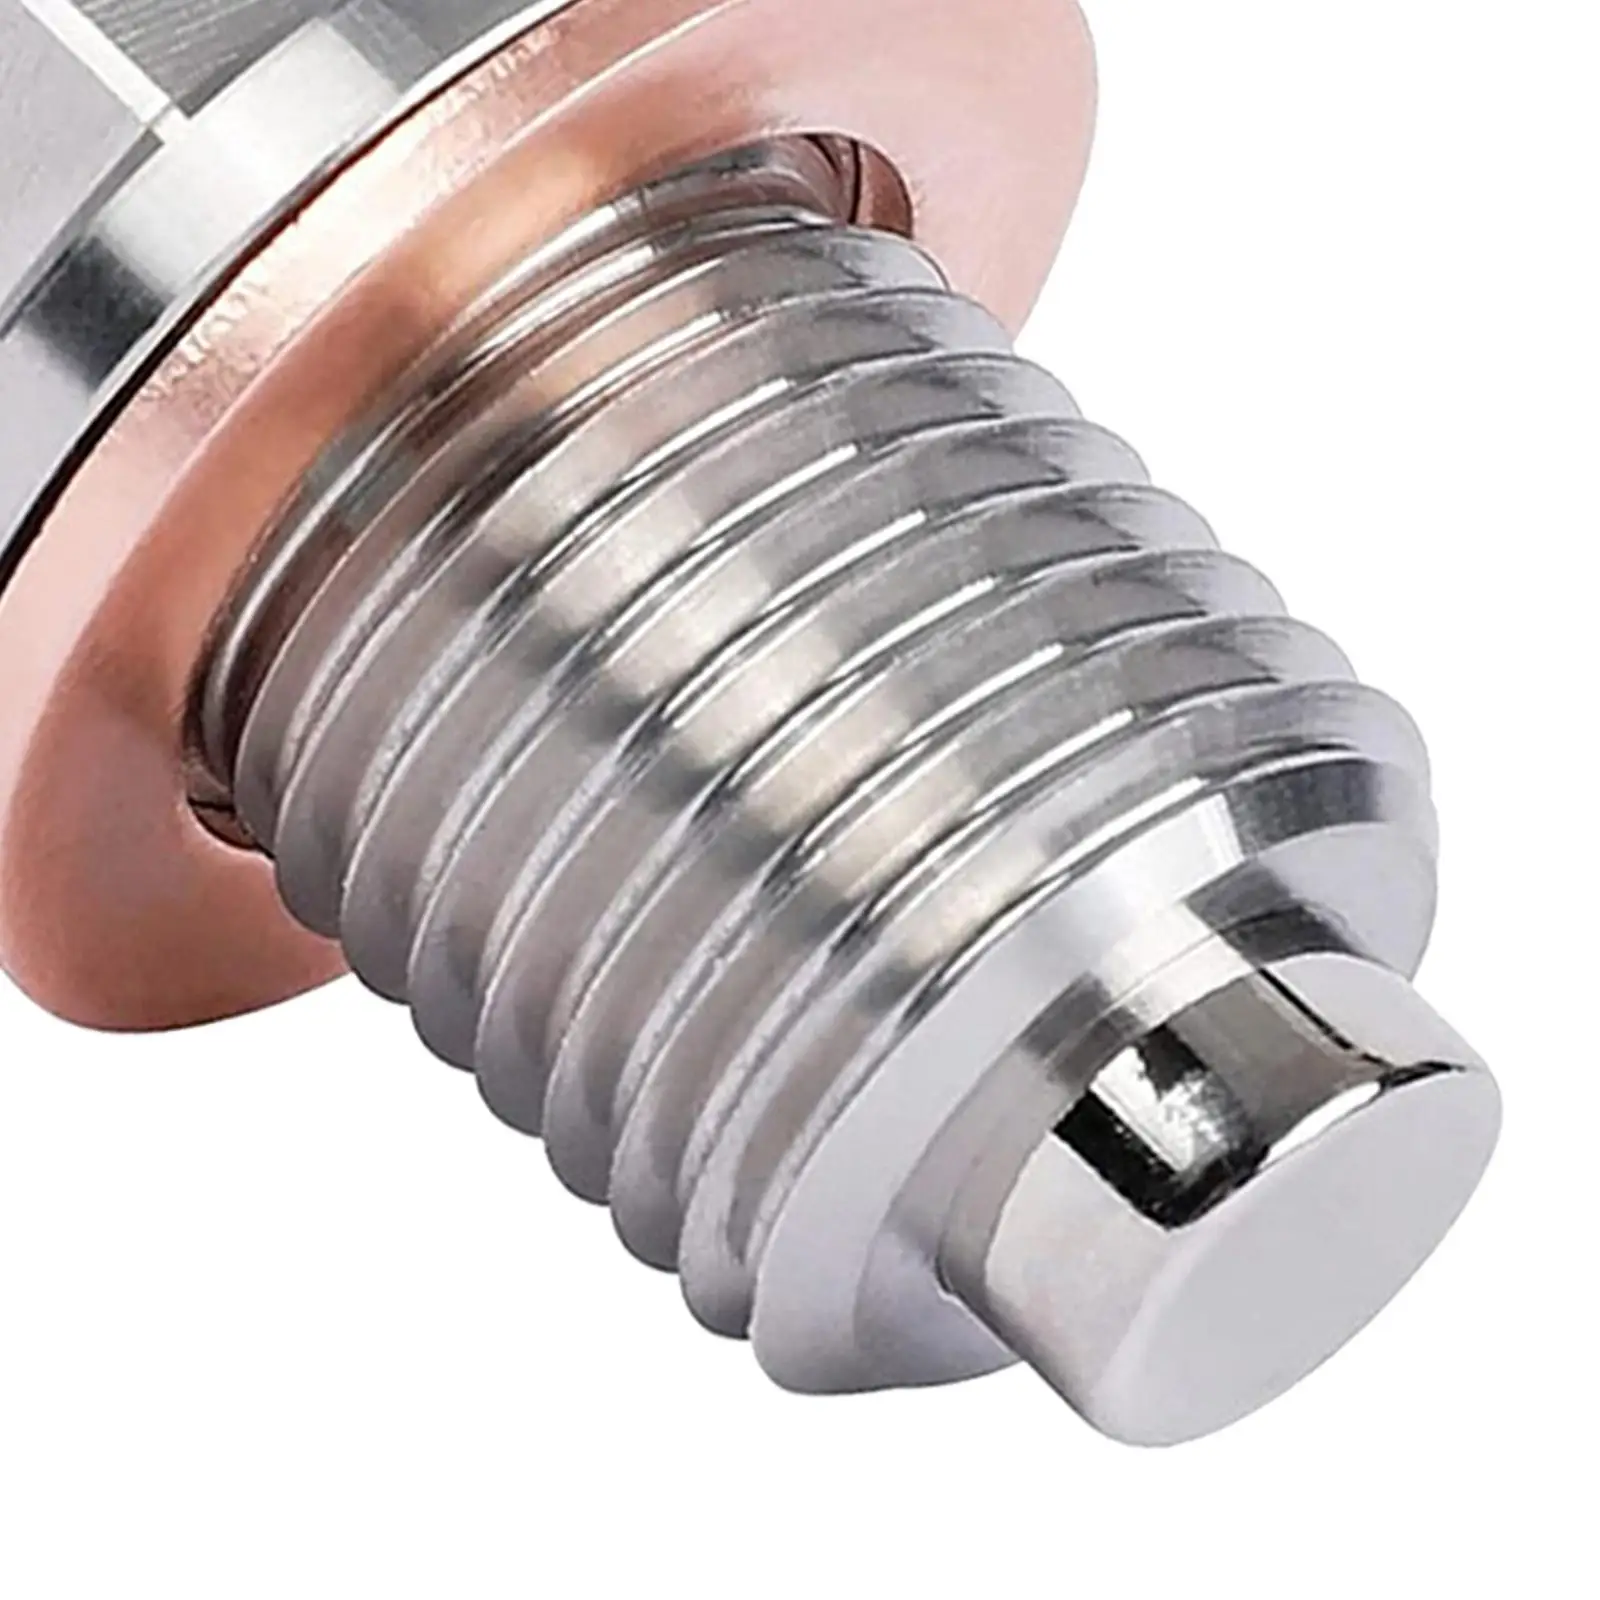 Oil Drain Plug Screw M12x1.5 Accessories Replace Reusable Easy to Install Anti Vibration Neodymium Magnet Bolt for Car